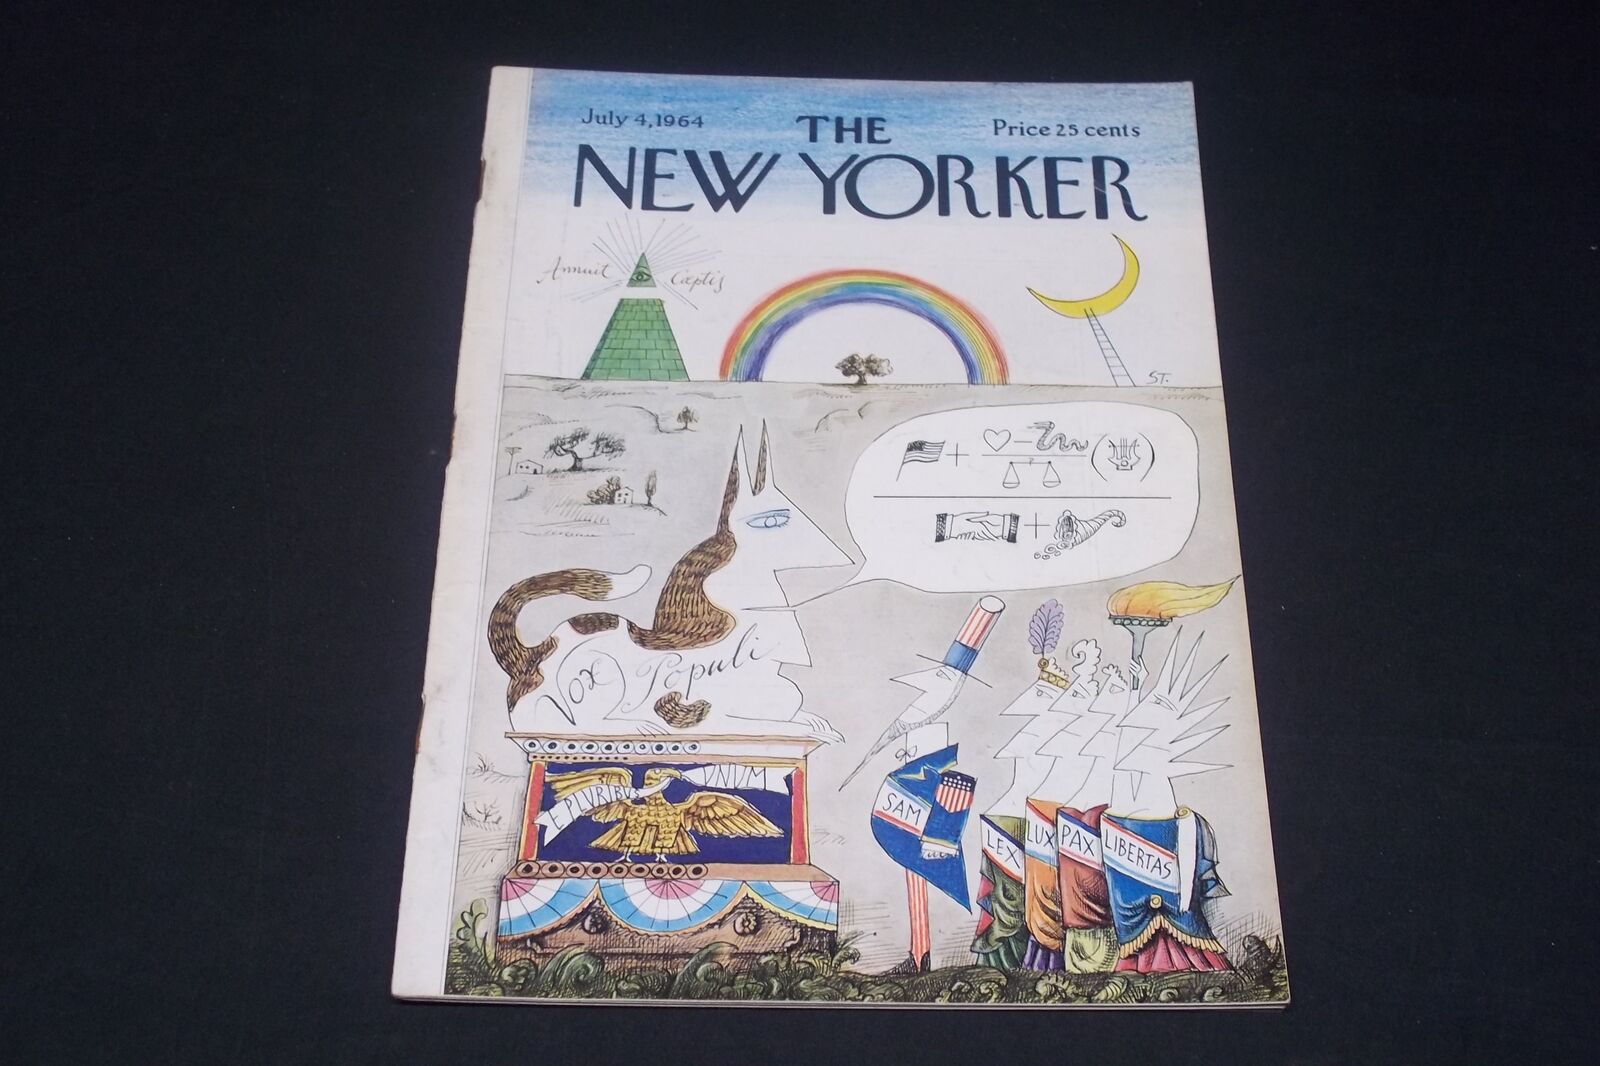 1964 JULY 4 NEW YORKER MAGAZINE - SAUL STEINBERG FRONT COVER - J 3222A